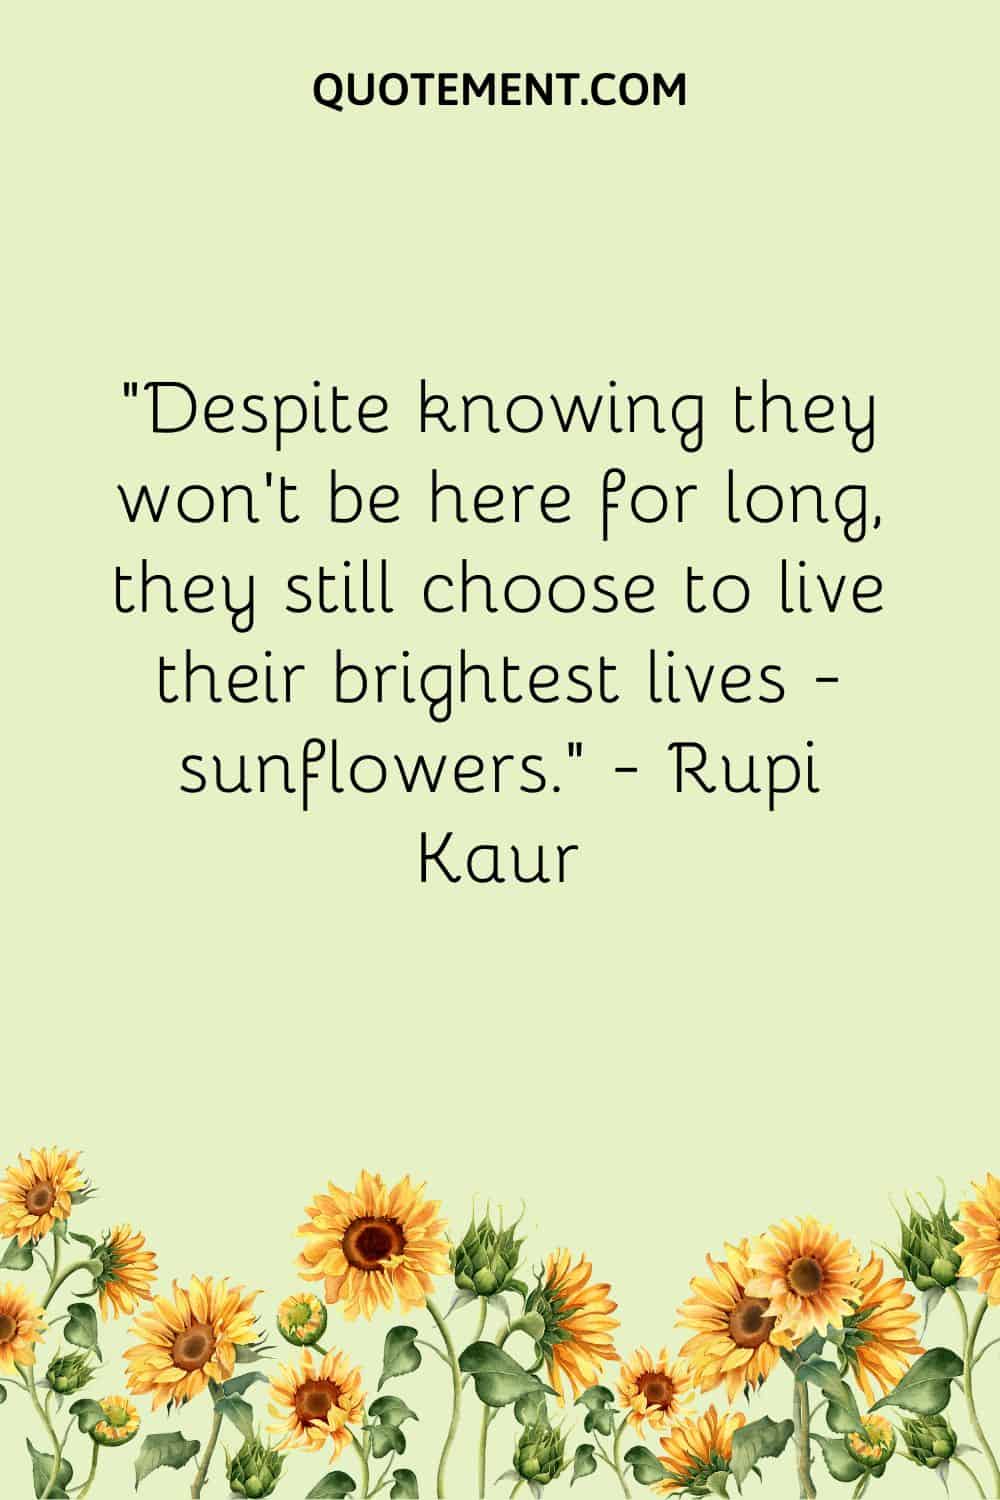 Despite knowing they won’t be here for long, they still choose to live their brightest lives — sunflowers